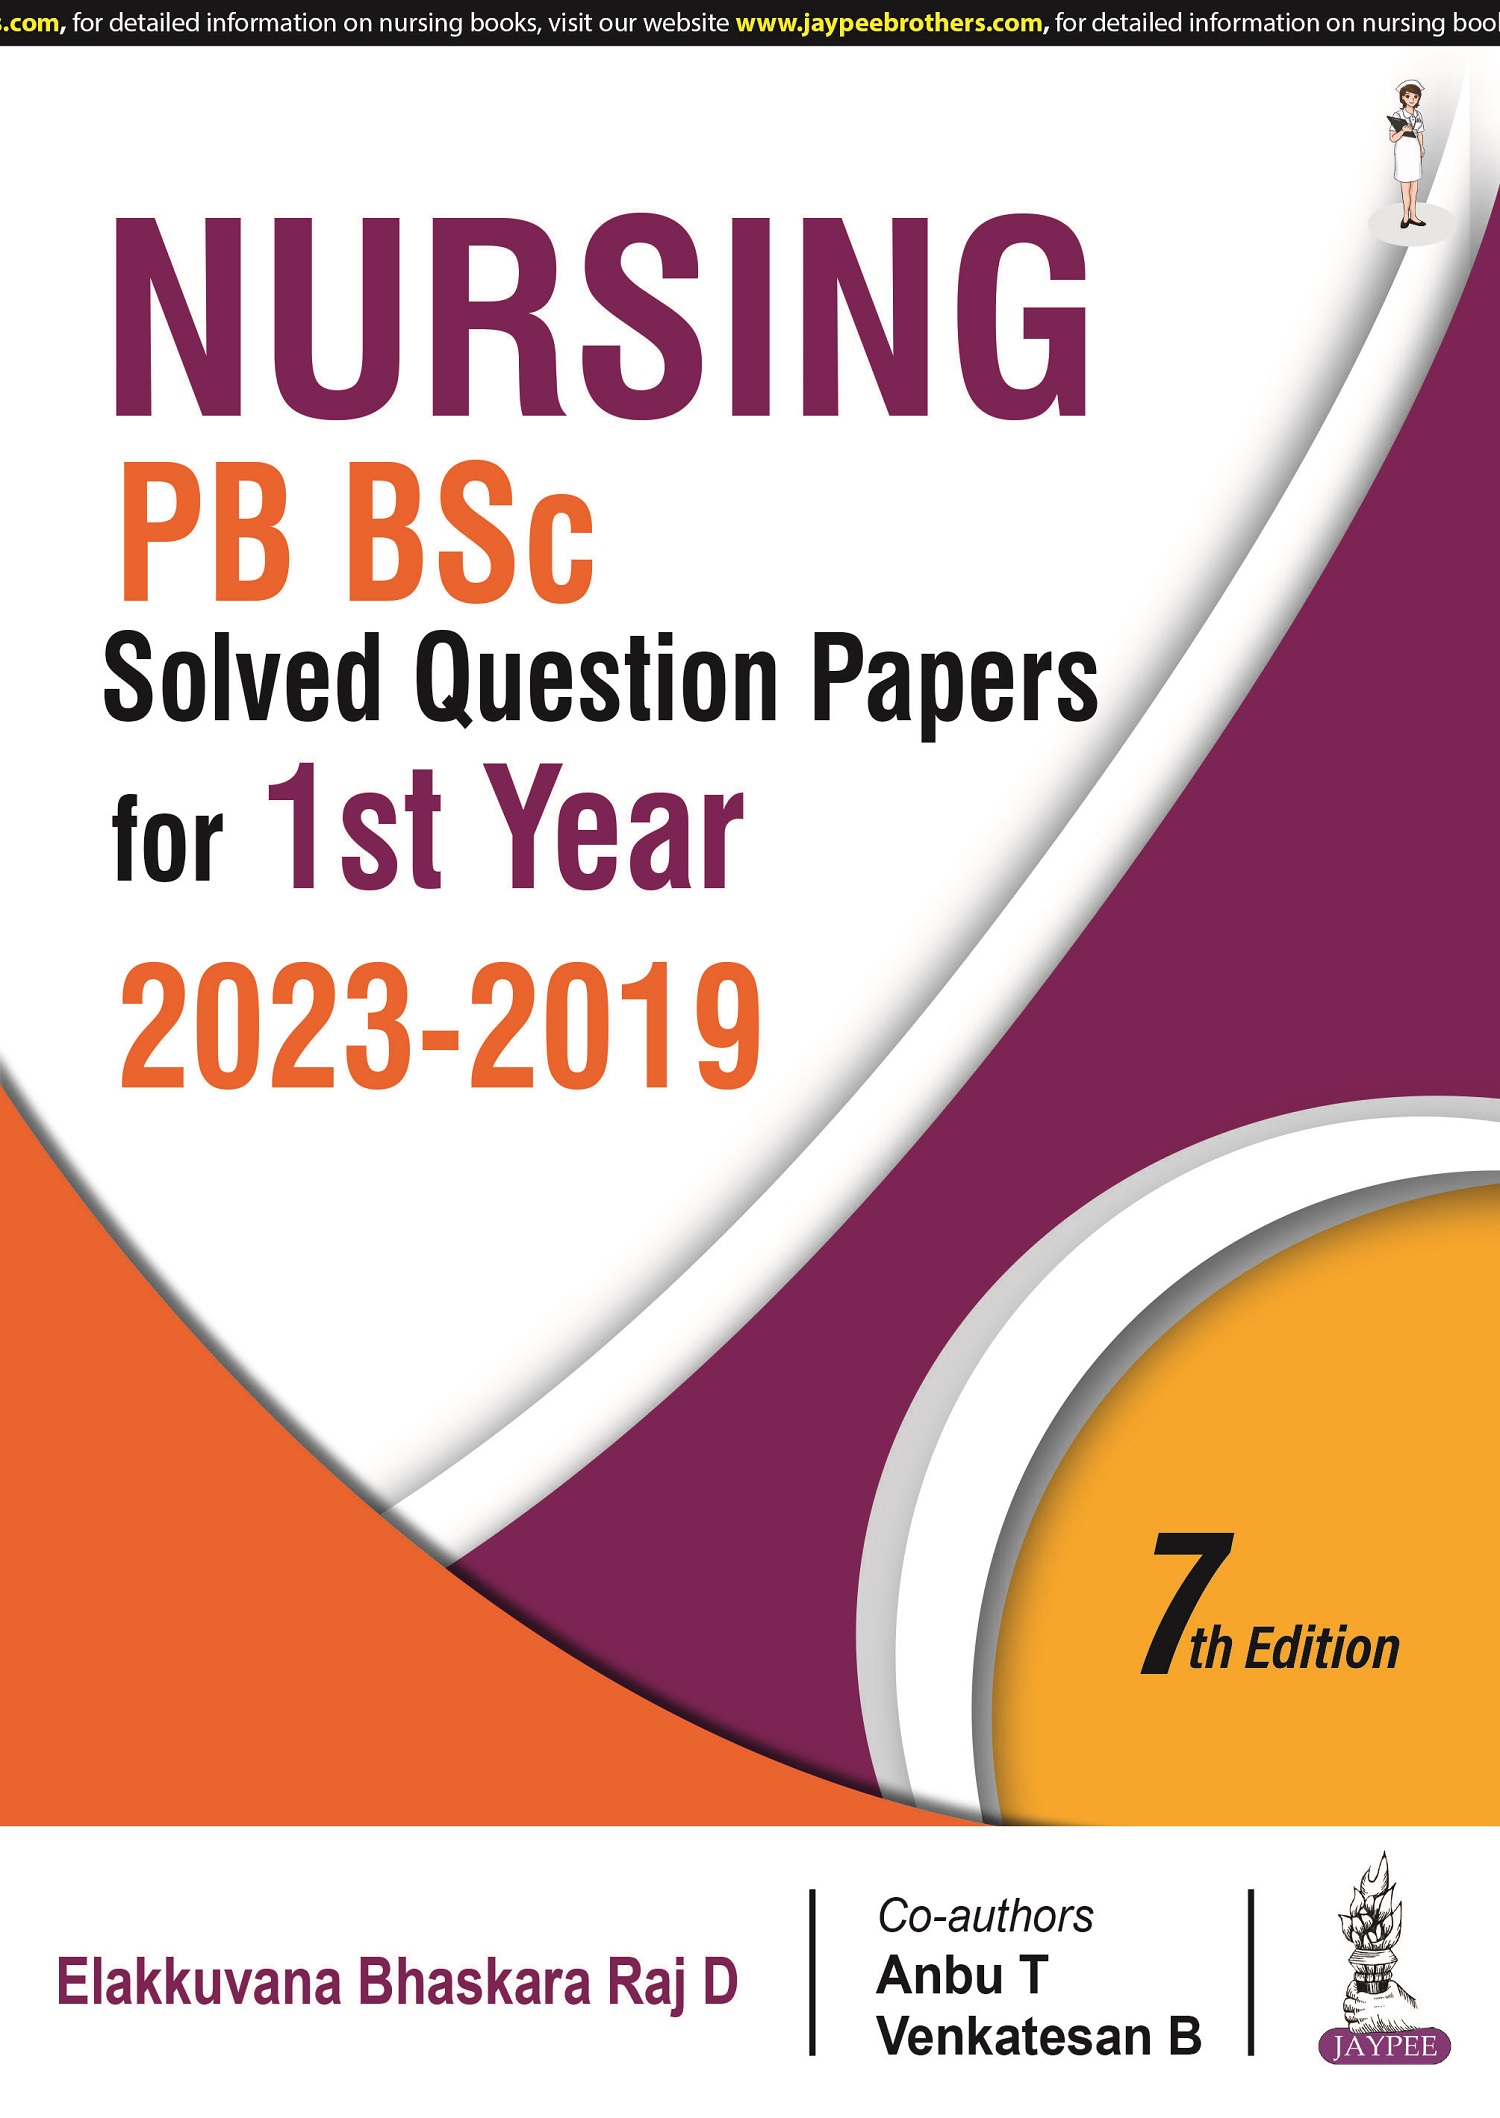 Nursing PB BSc Solved Question Papers for 1st Year (2023-2019)